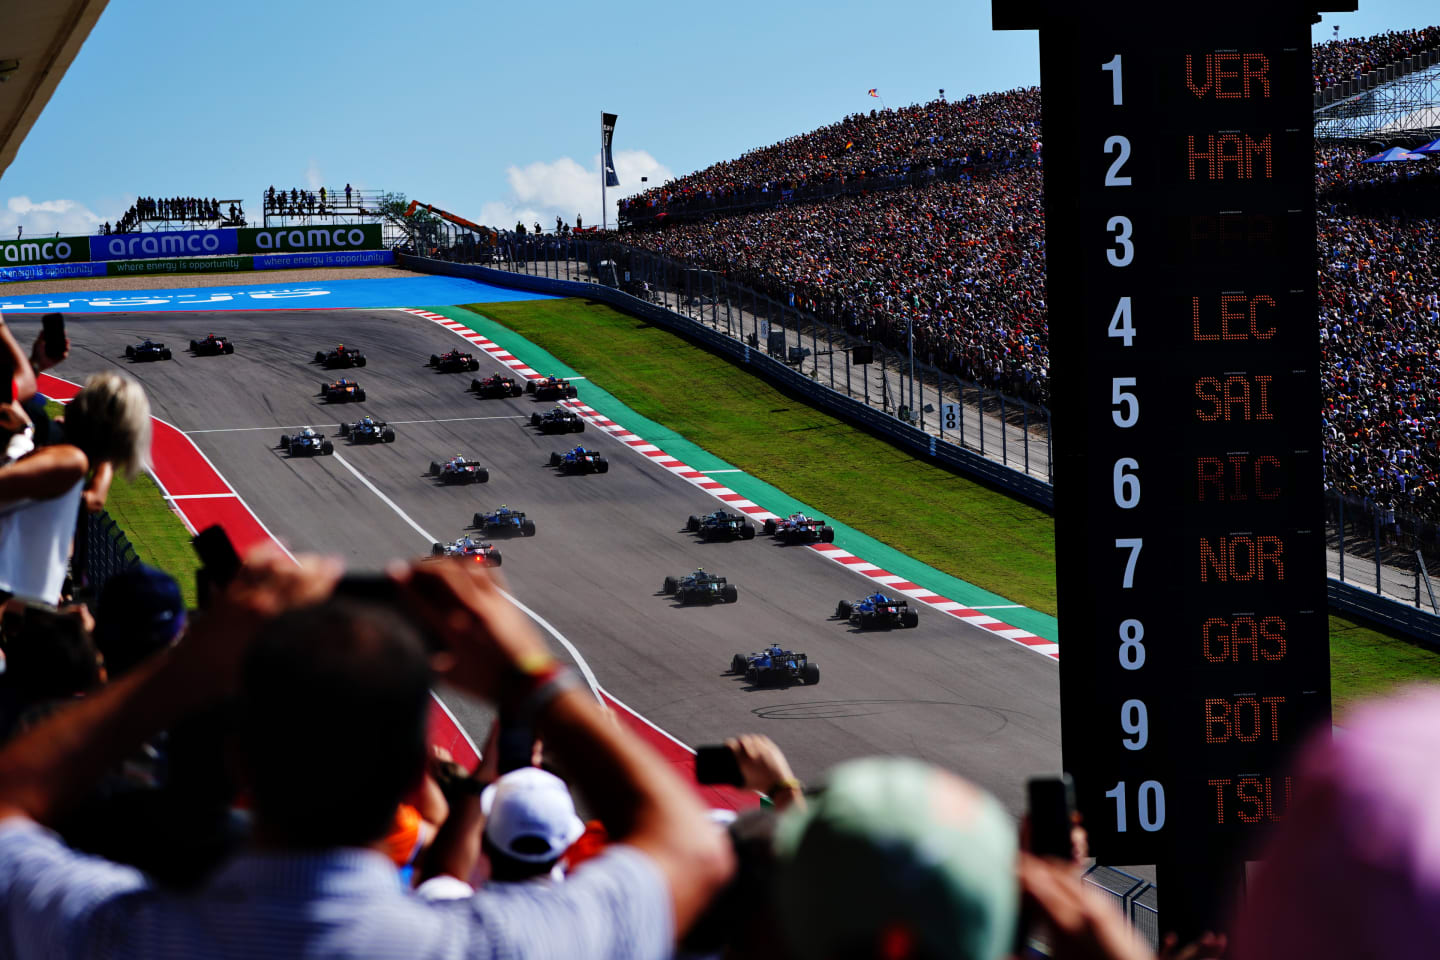 AUSTIN, TEXAS - OCTOBER 24: A rear view of the start during the F1 Grand Prix of USA at Circuit of